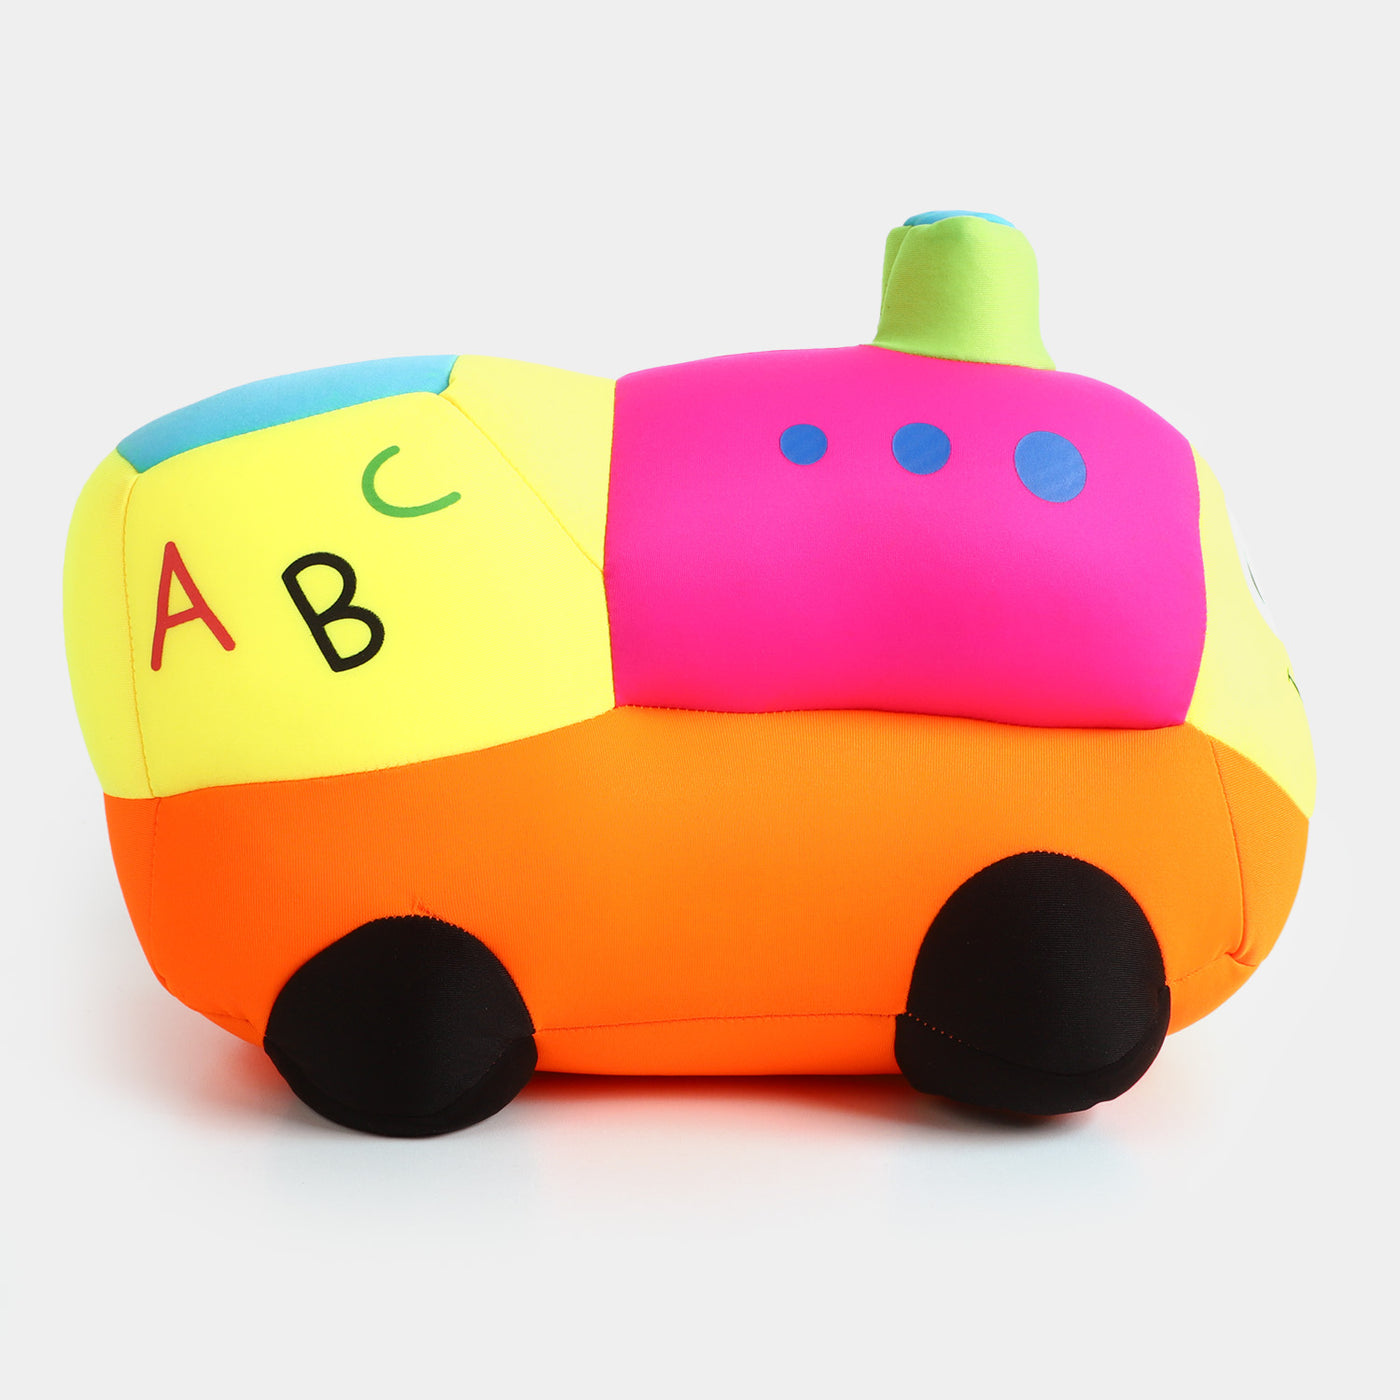 Soft Bean Train Toy For Kids - Multi